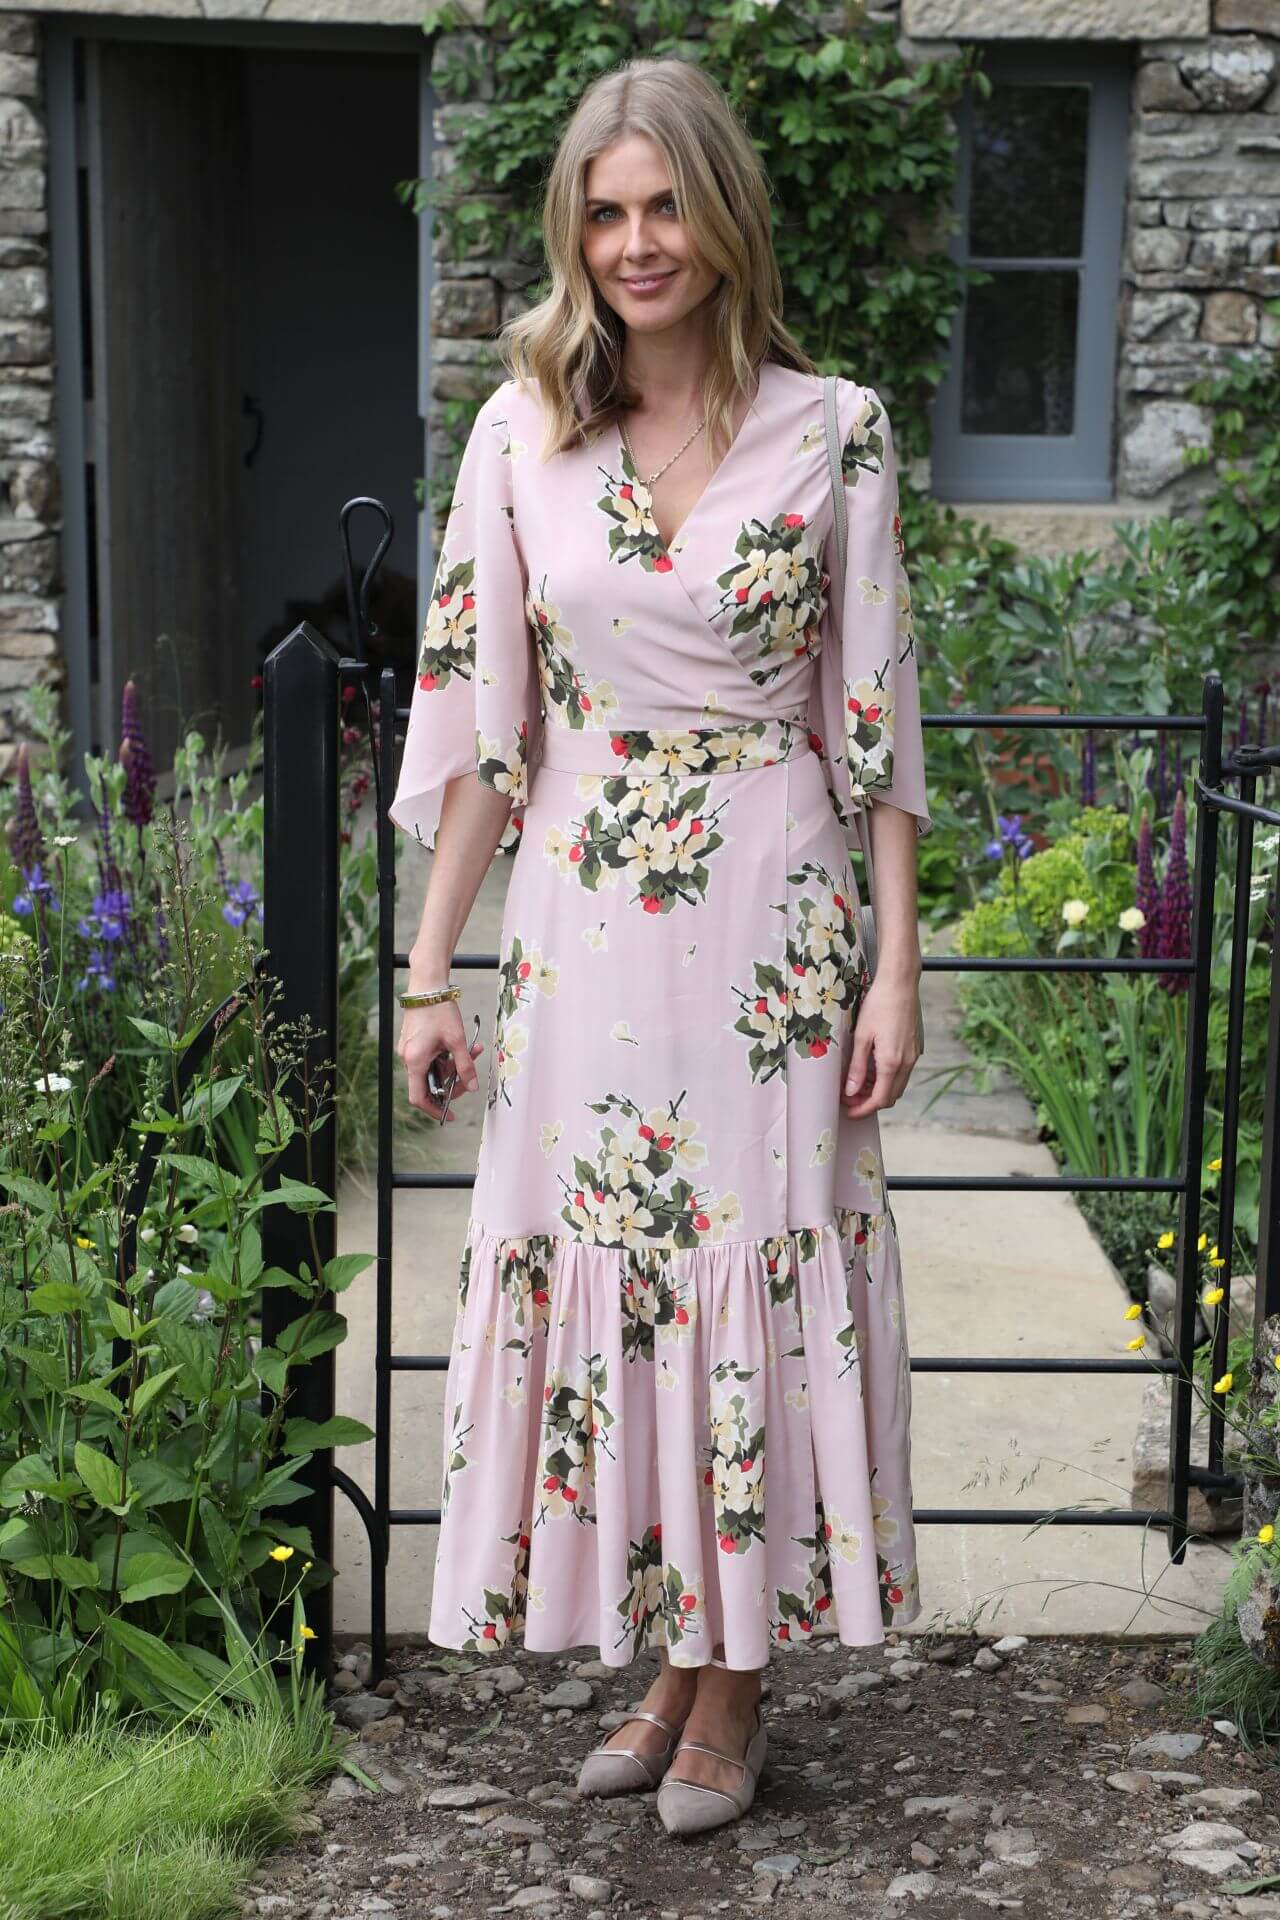 Donna Air In Floral Print Long Dress